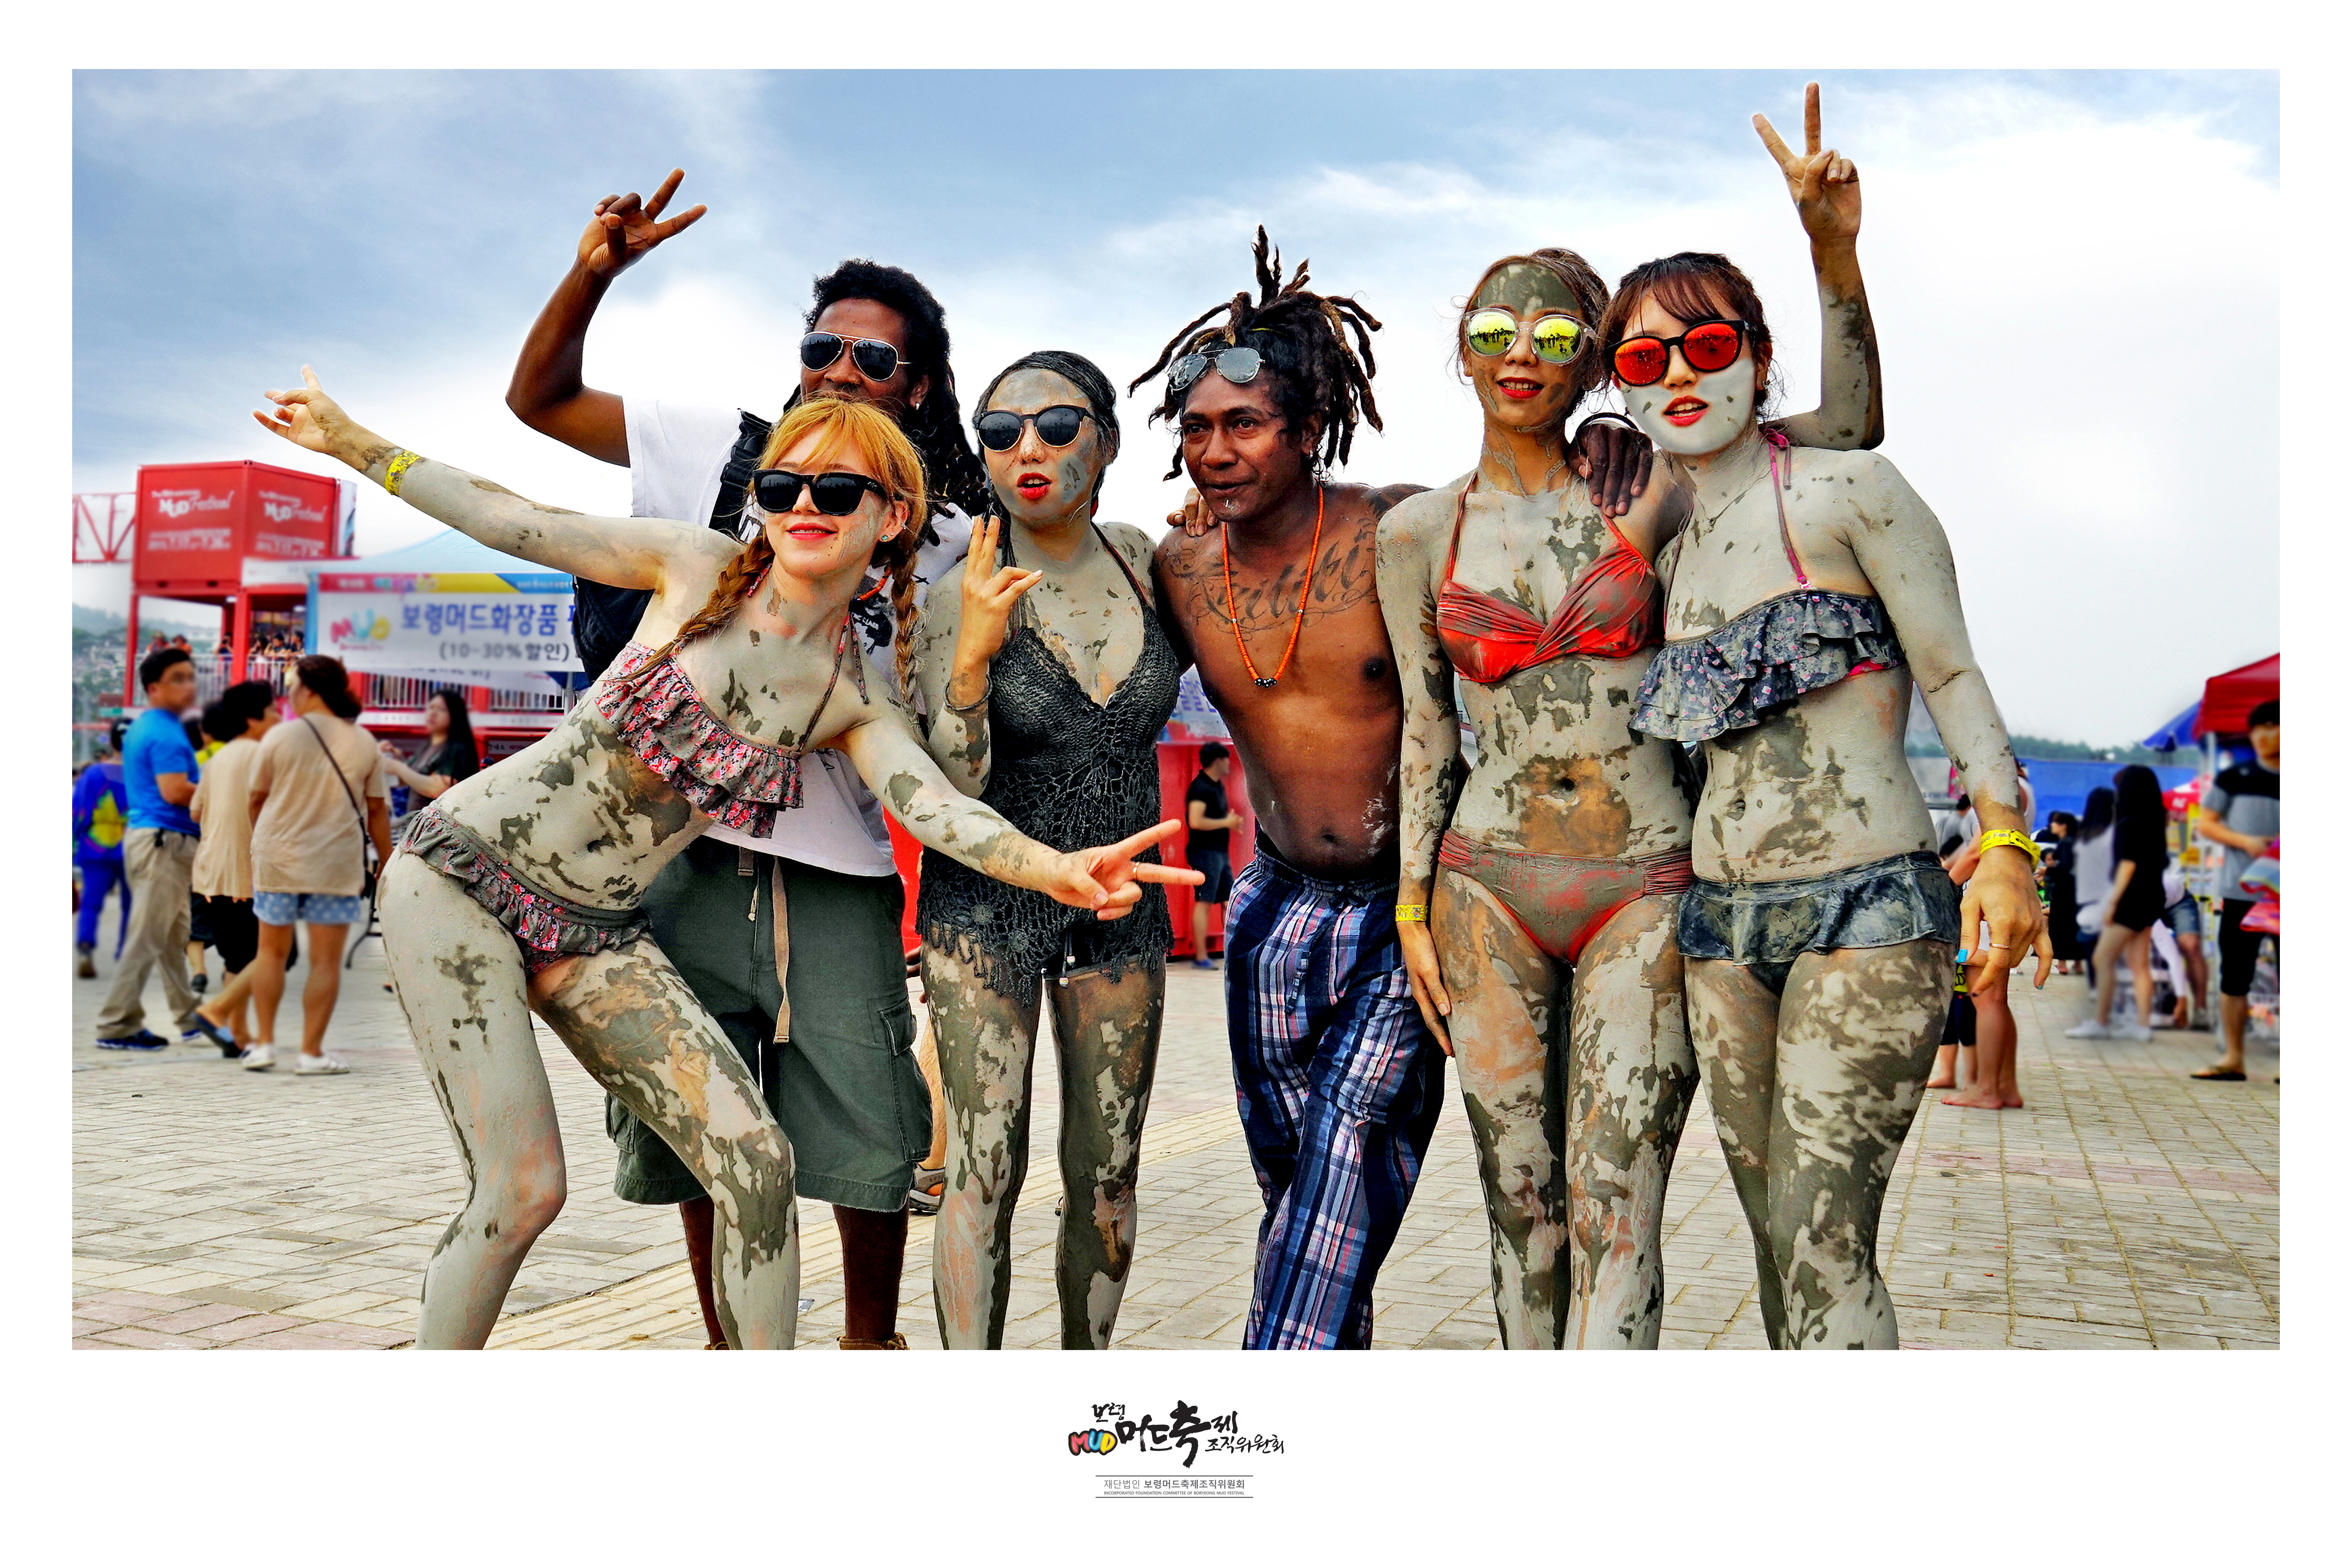 (Summer) 2019 Boryeong Mud Festival - Depart from Seoul